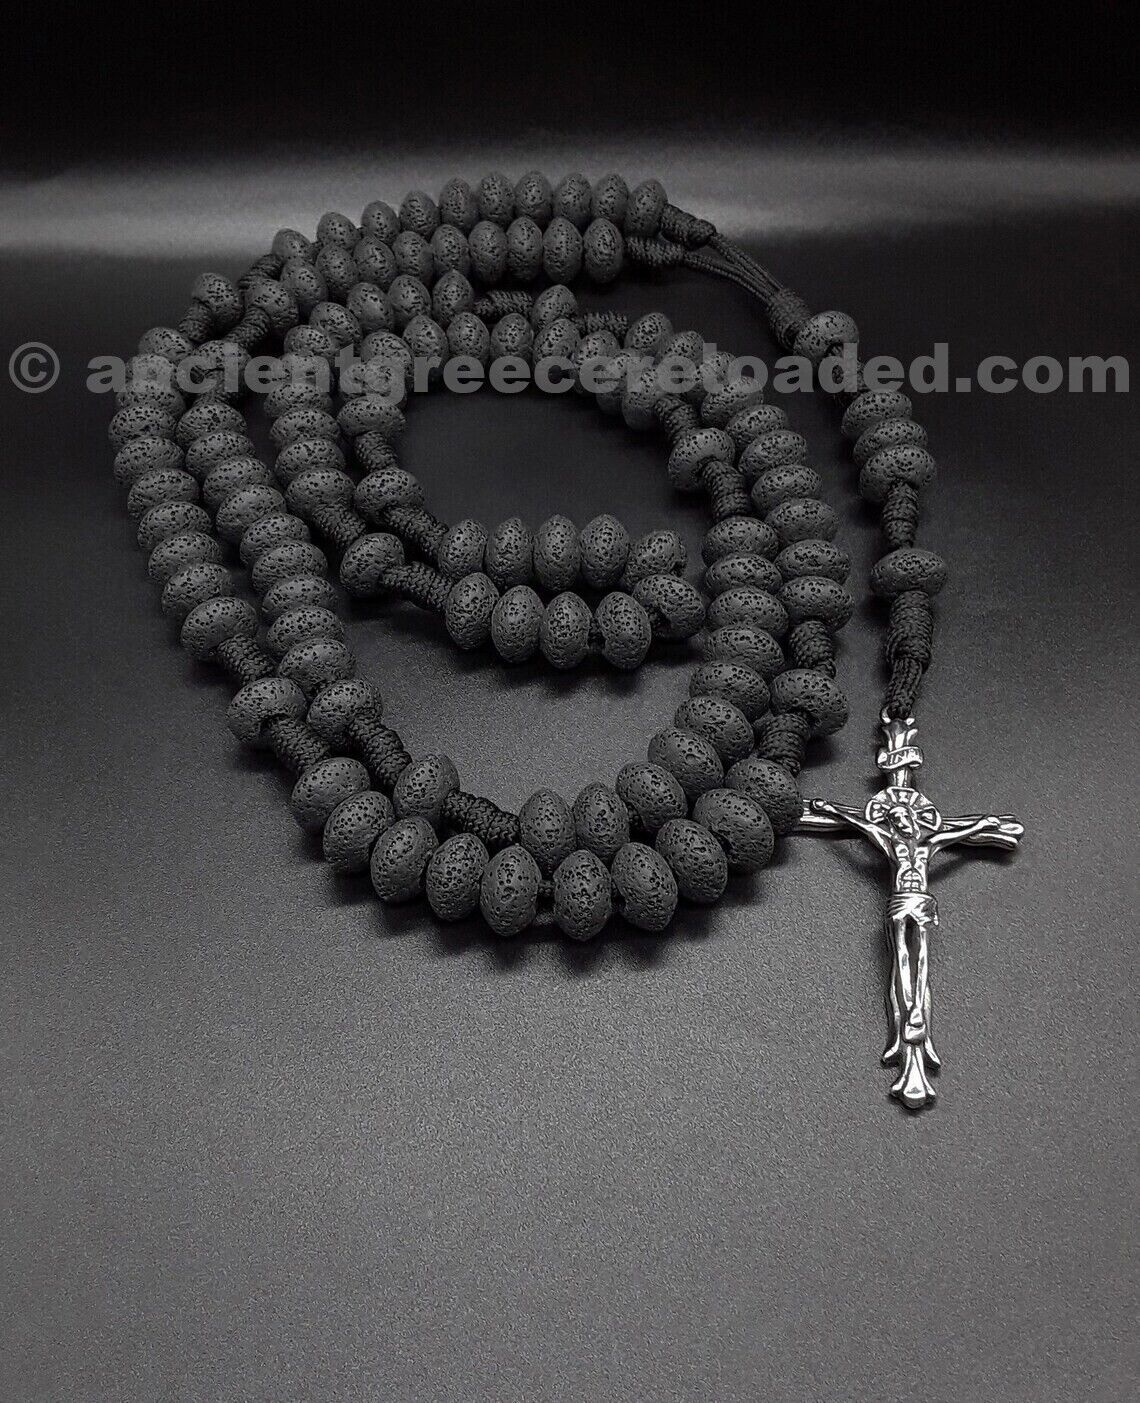 Through Darkness Military 550 Paracord 10 Decade Rosary, Volcanic Lava Stones.